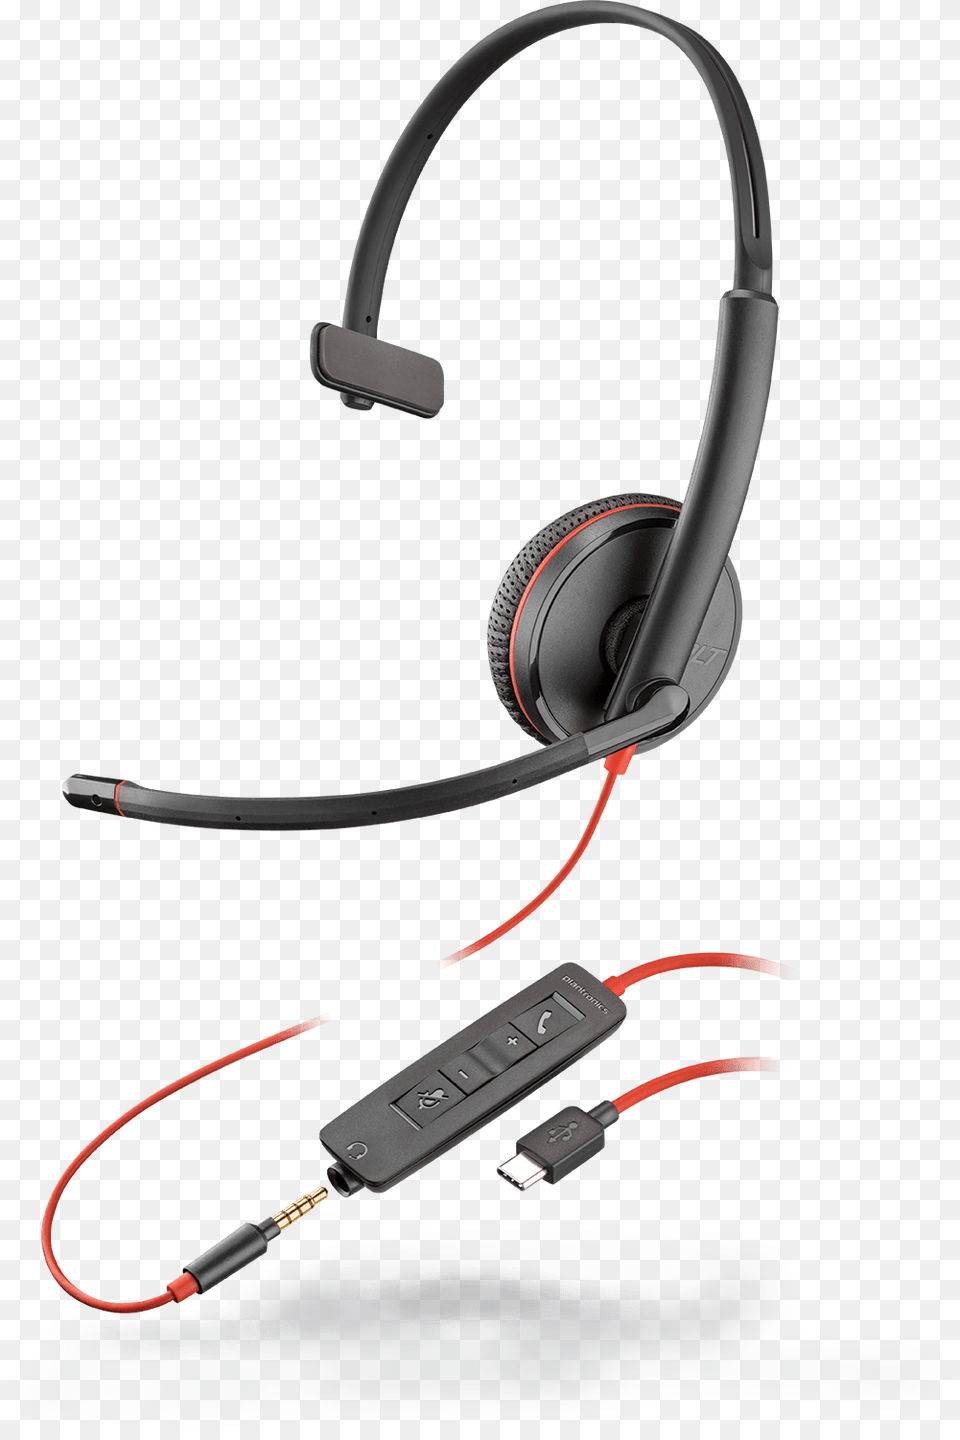 Plantronics, Electronics, Headphones, Electrical Device, Microphone Png Image